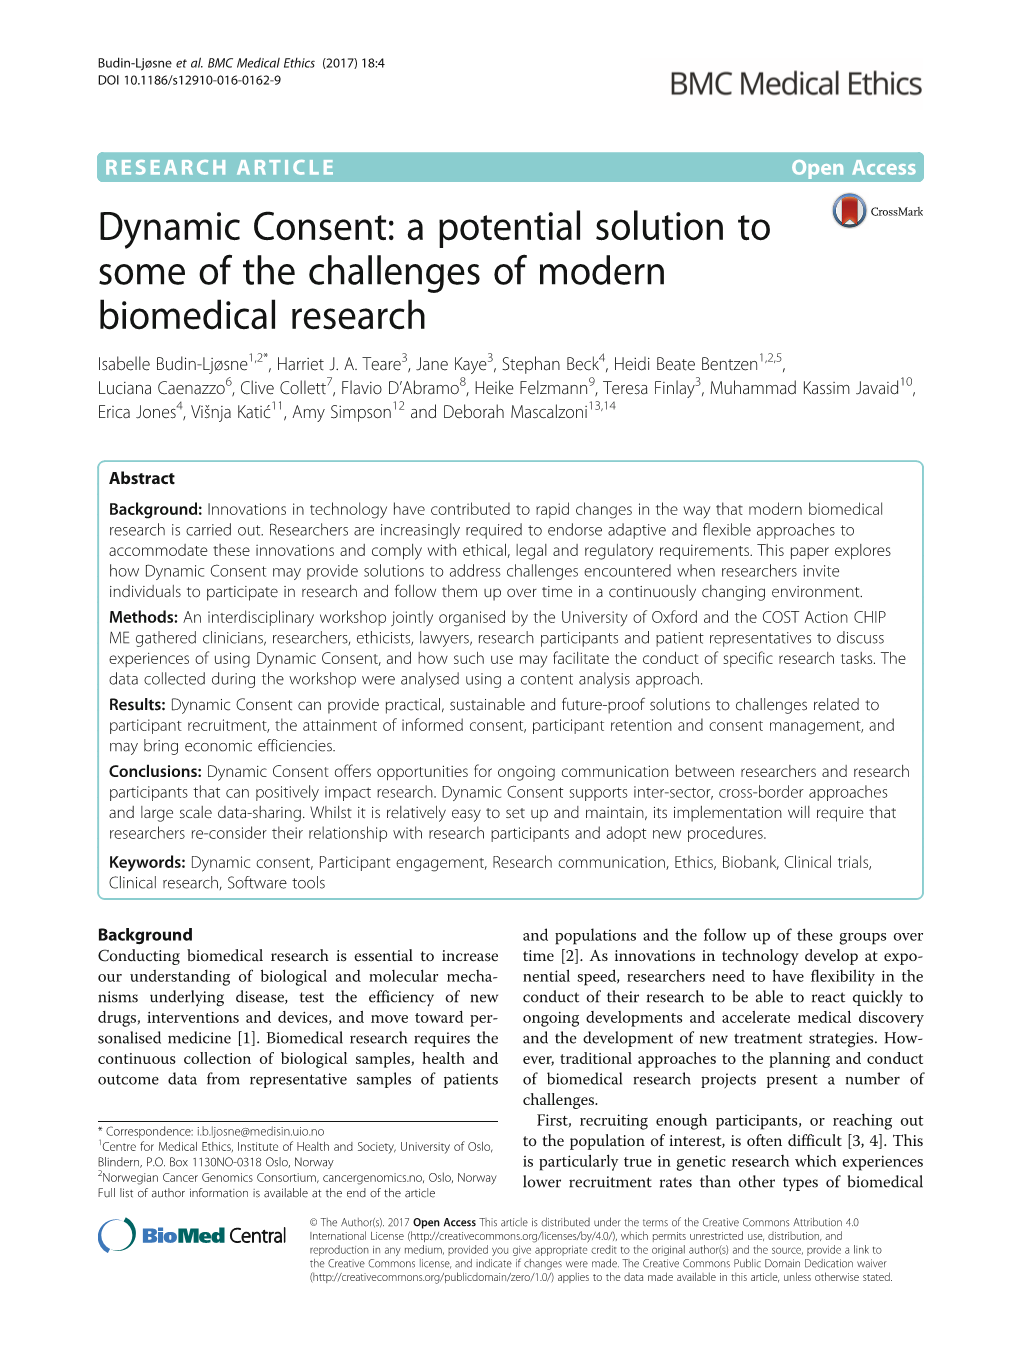 Dynamic Consent: a Potential Solution to Some of the Challenges of Modern Biomedical Research Isabelle Budin-Ljøsne1,2*, Harriet J